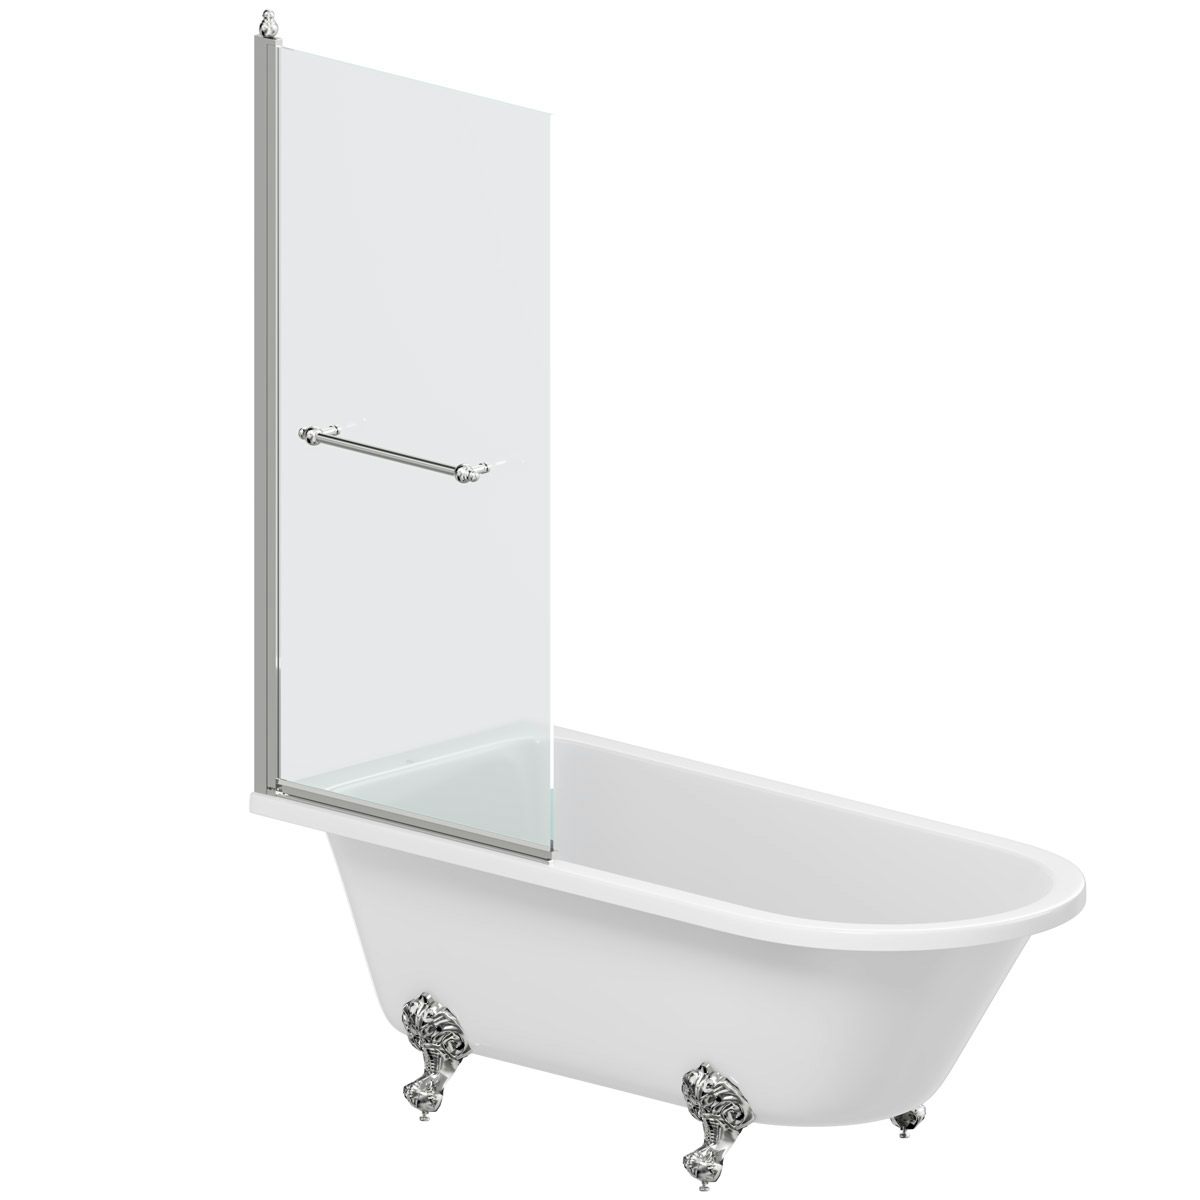 Orchard Dulwich traitional freestanding shower bath with 8mm shower screen and rail 1710 x 780